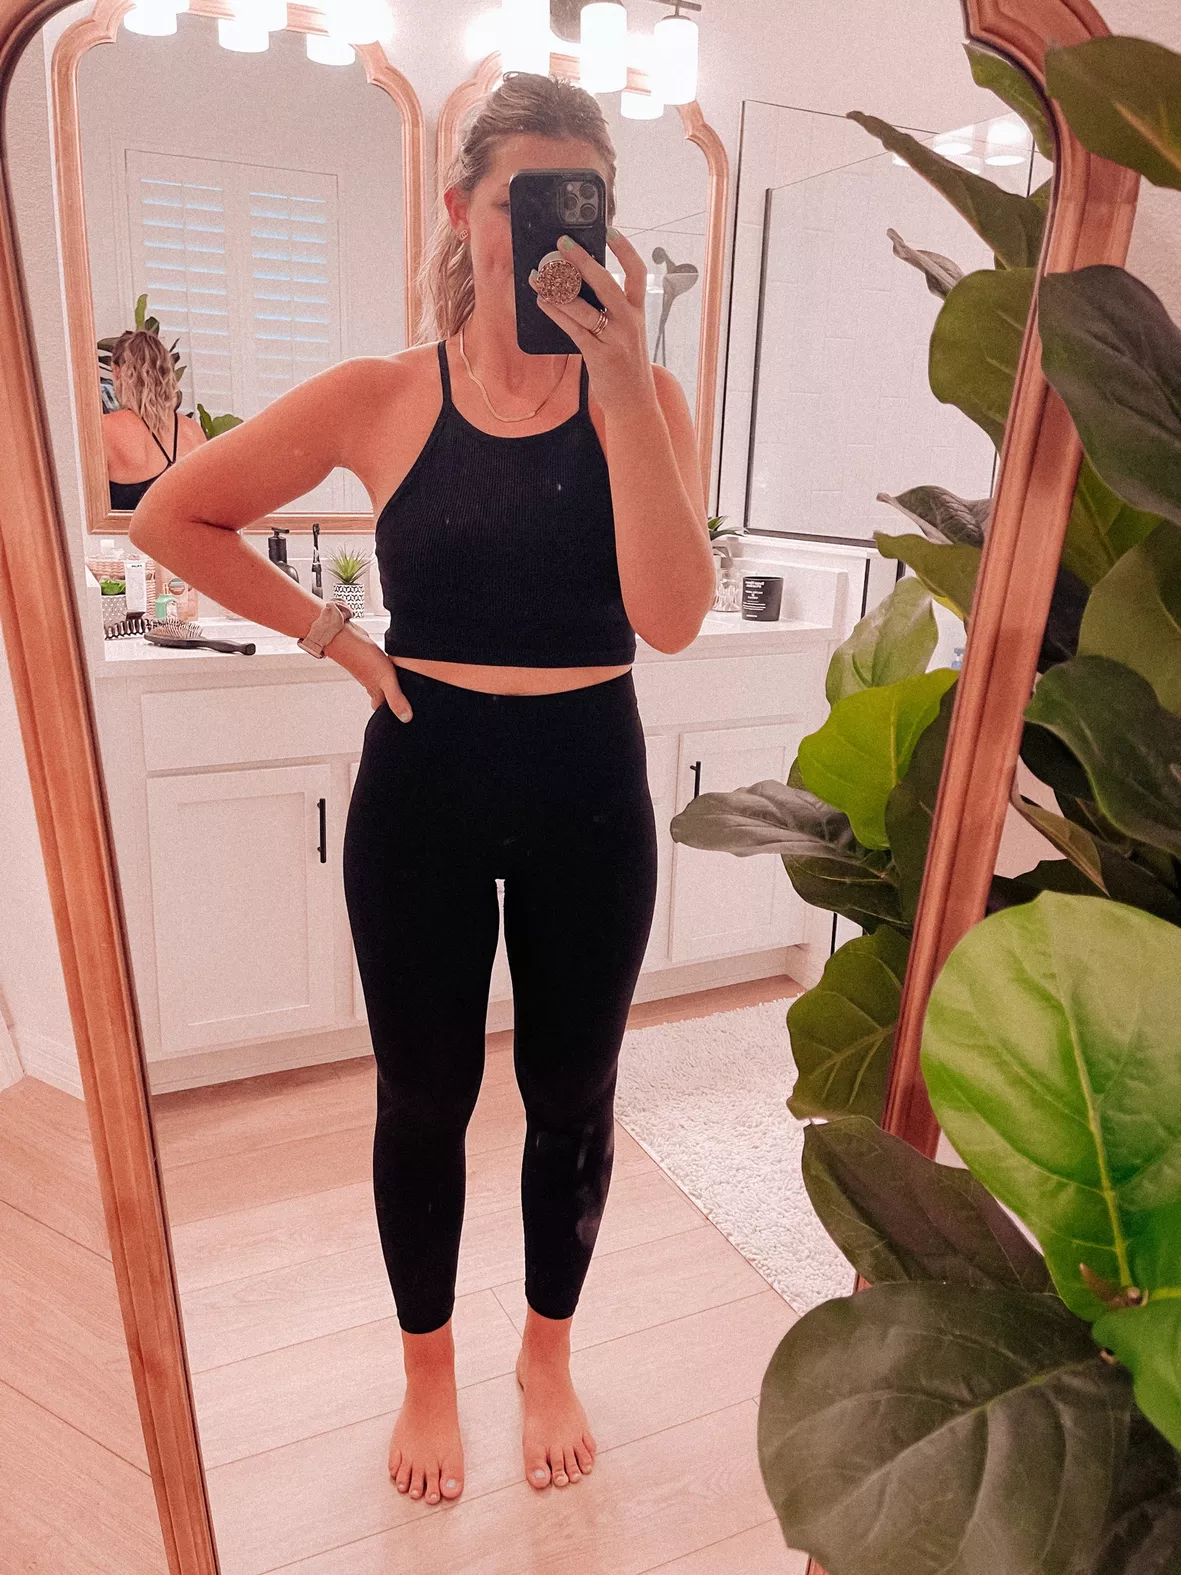 The most flattering leggings and bralette top from Target! Both